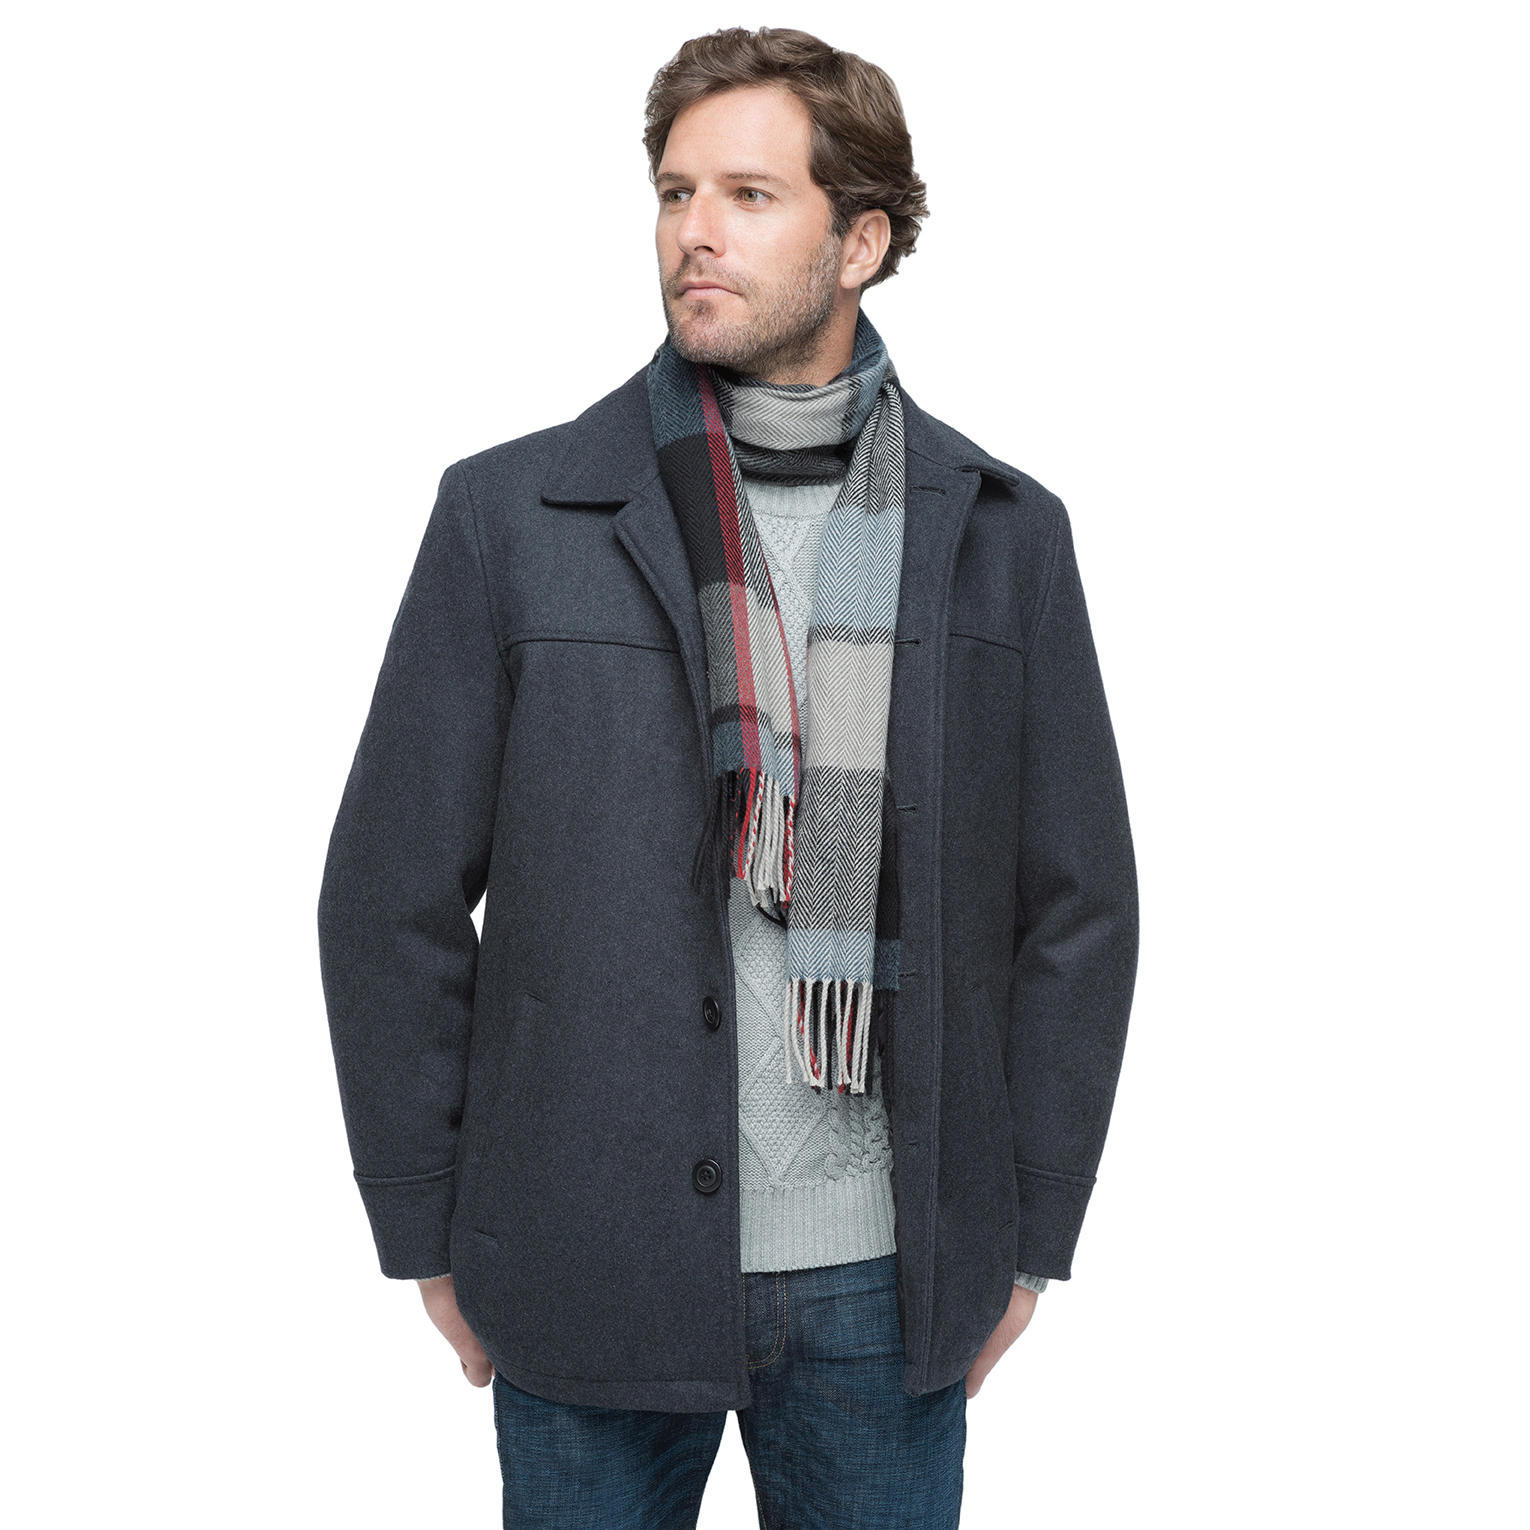 Lyst - G.h. bass & co. Wool Blend Coat with Scarf in Gray for Men